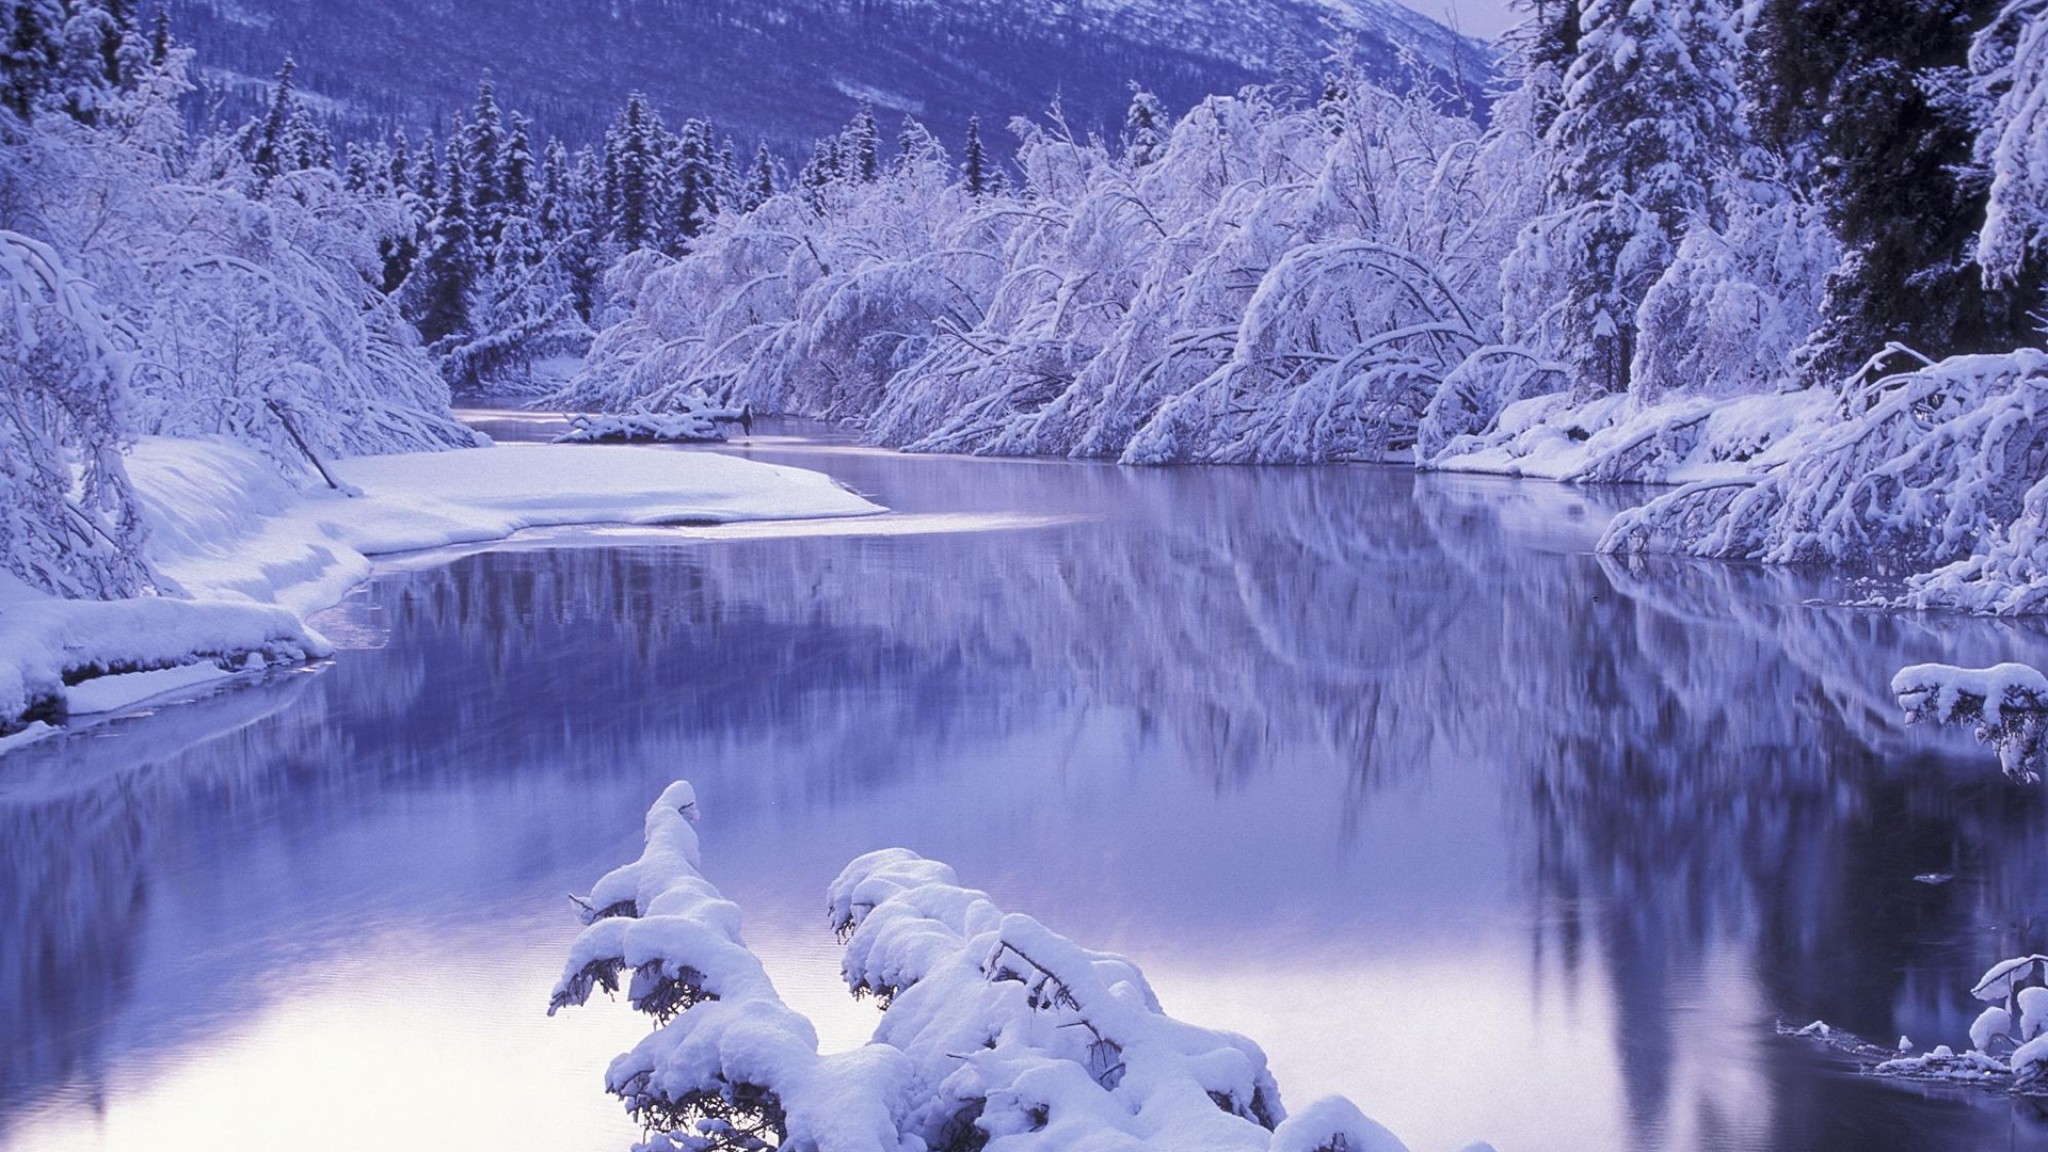 Wallpaper ID 169438  snow mountains nature winter time trees snowy  winter landscape free download